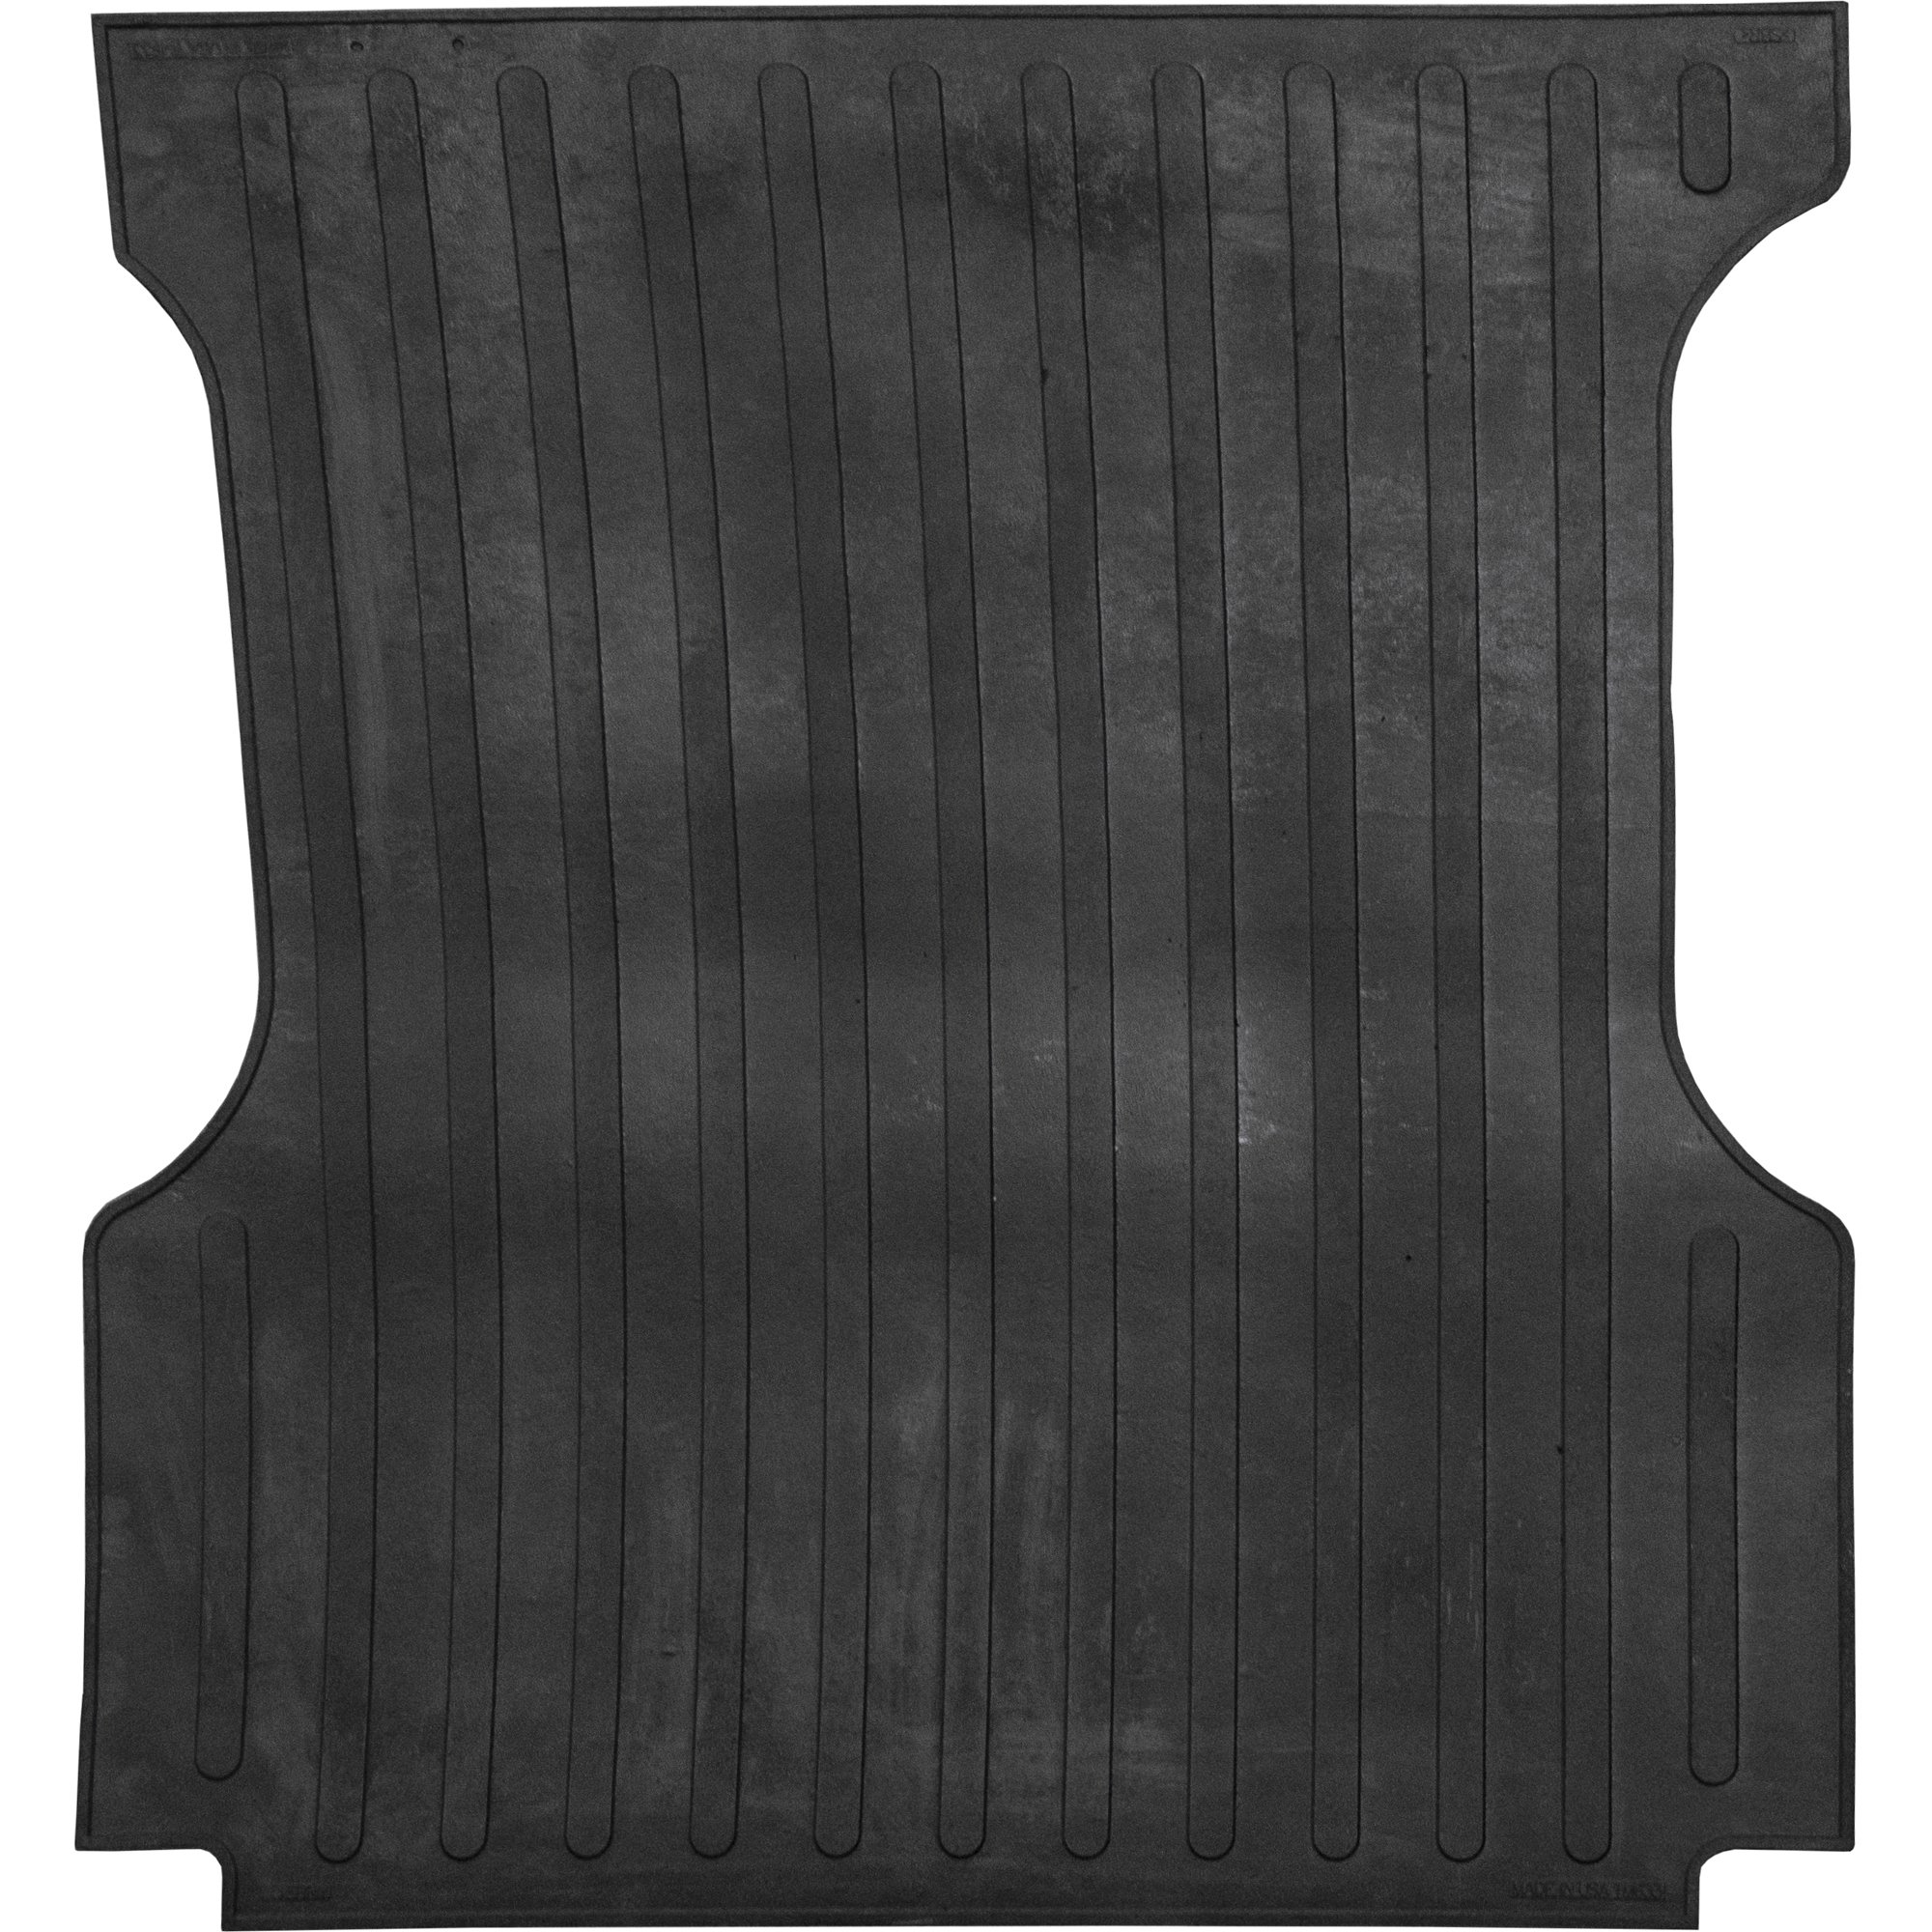 Boomerang Rubber, Chevy/GMC/Sierra 1500-3500 Bed Mat, Standard Bed, 6.5ft. Long, Primary Color Black, Model TM585BAGGED